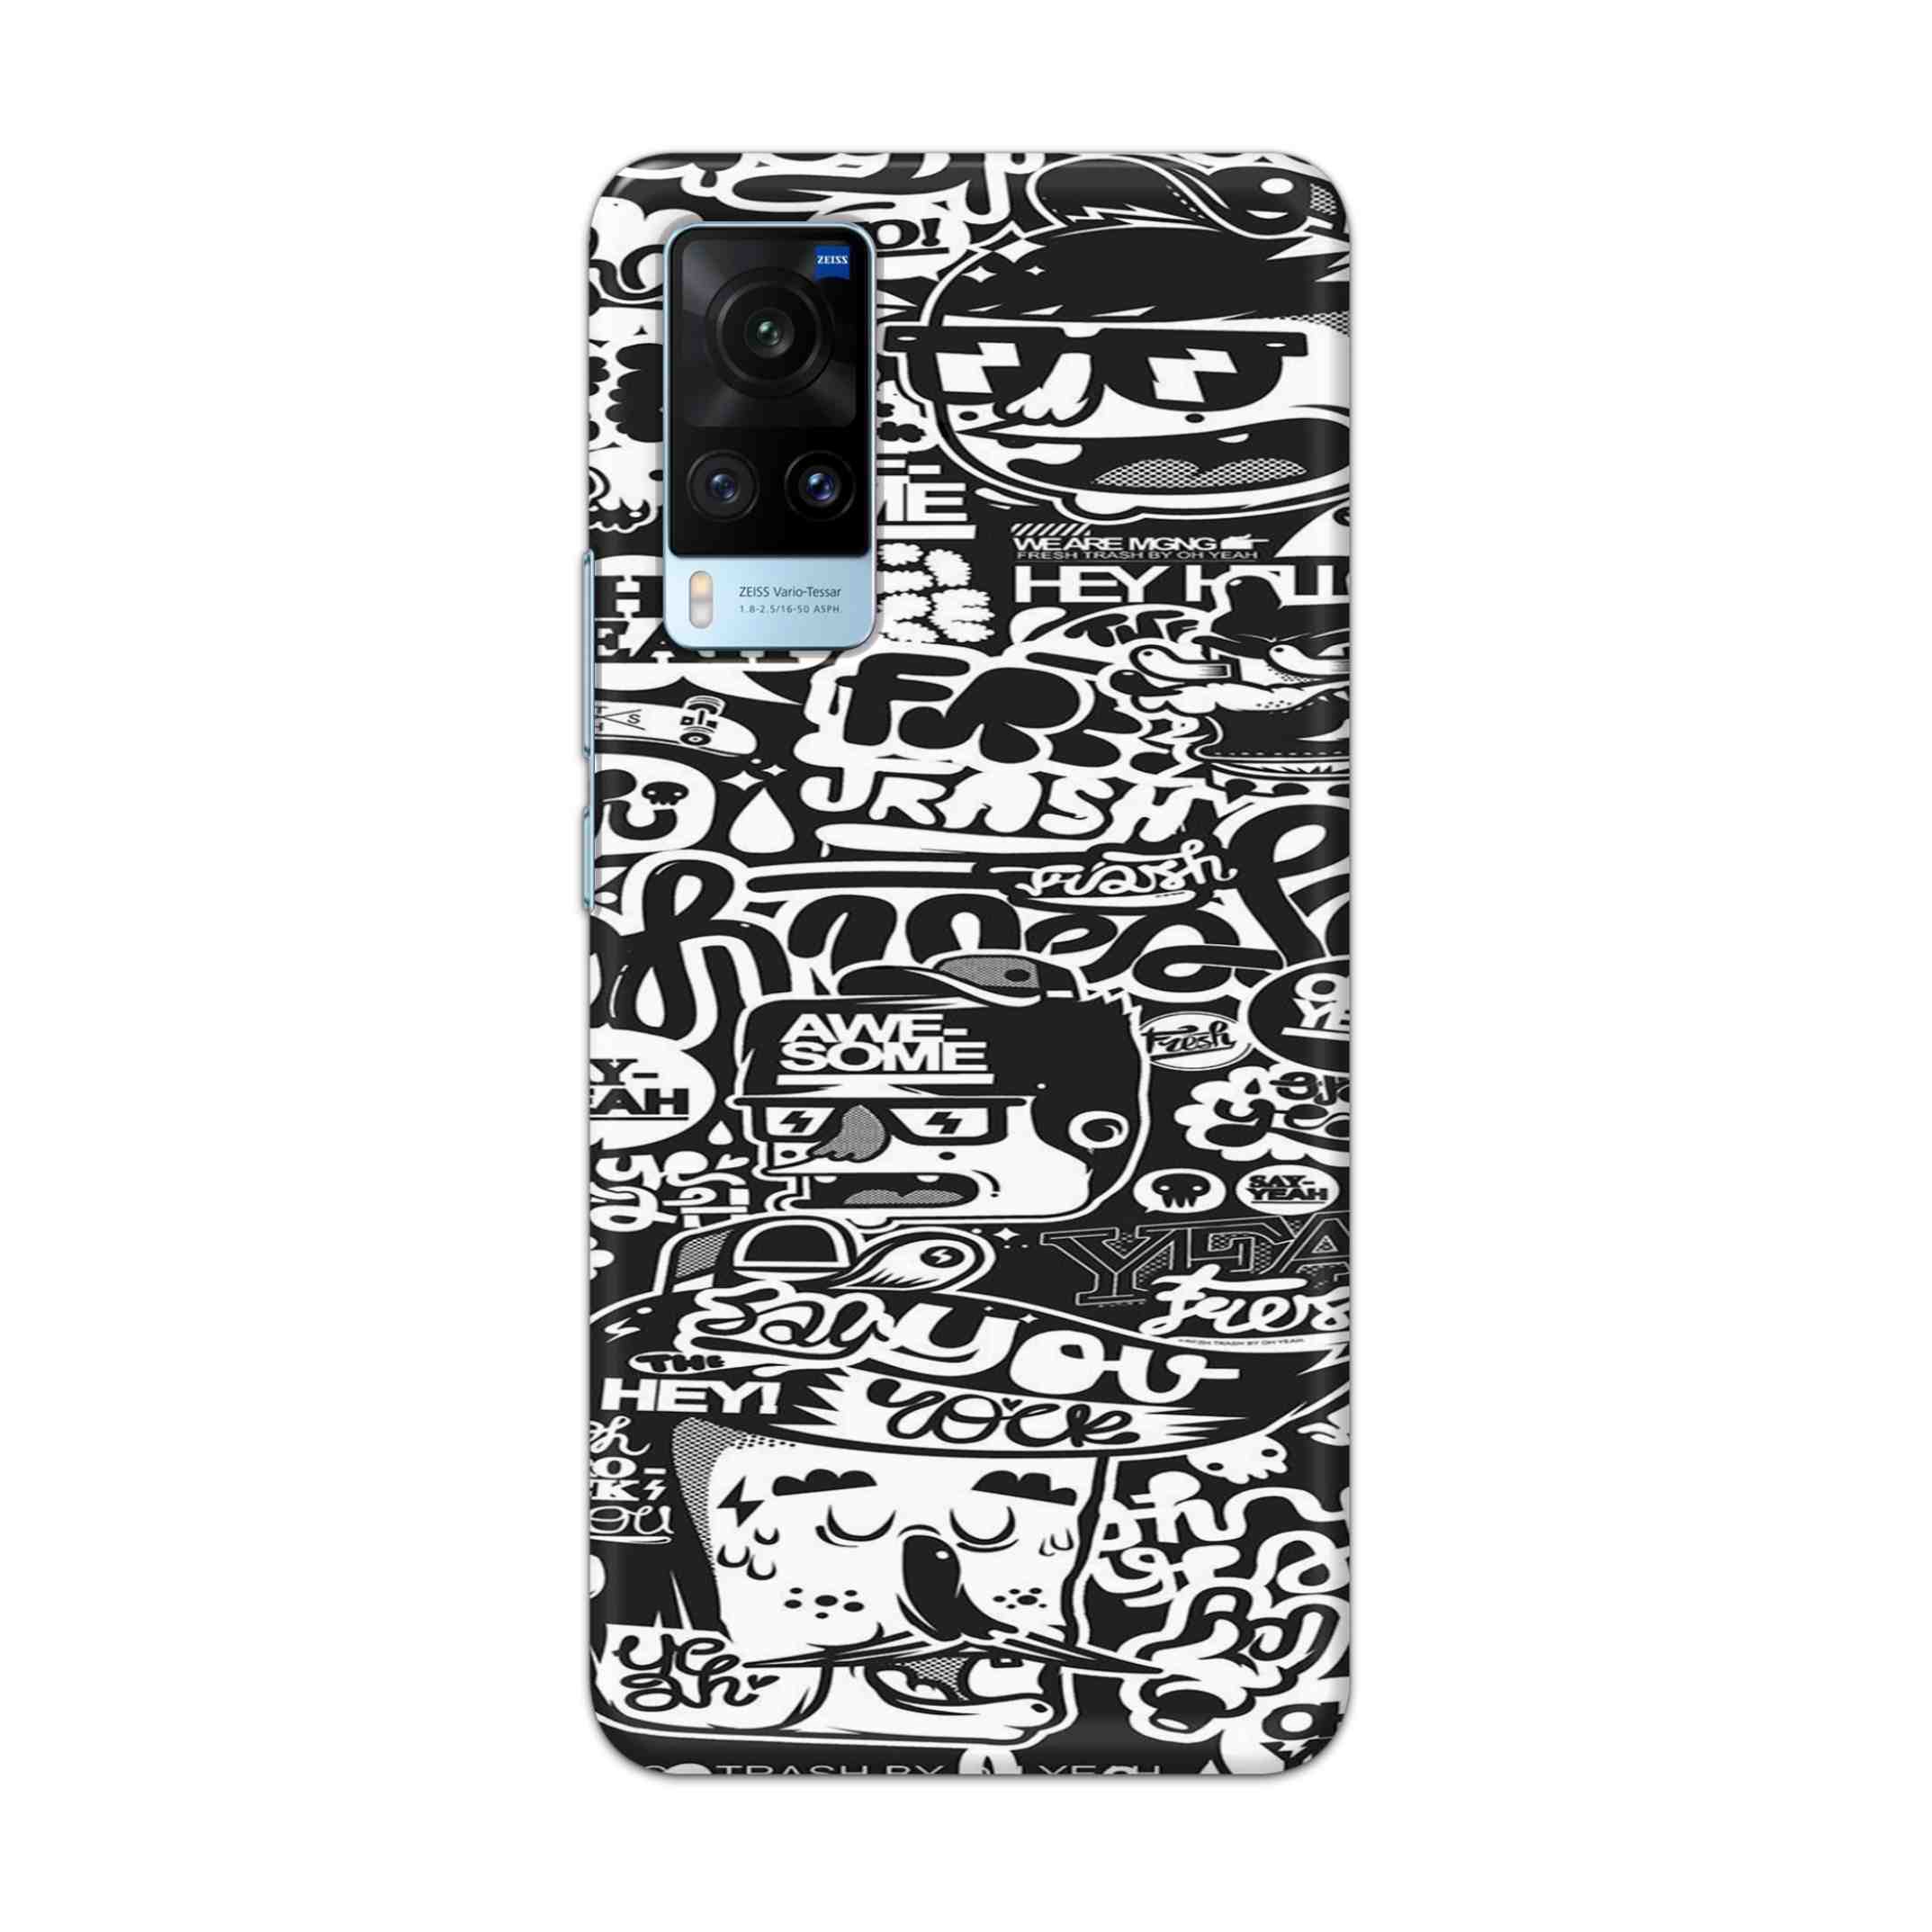 Buy Awesome Hard Back Mobile Phone Case Cover For Vivo X60 Online